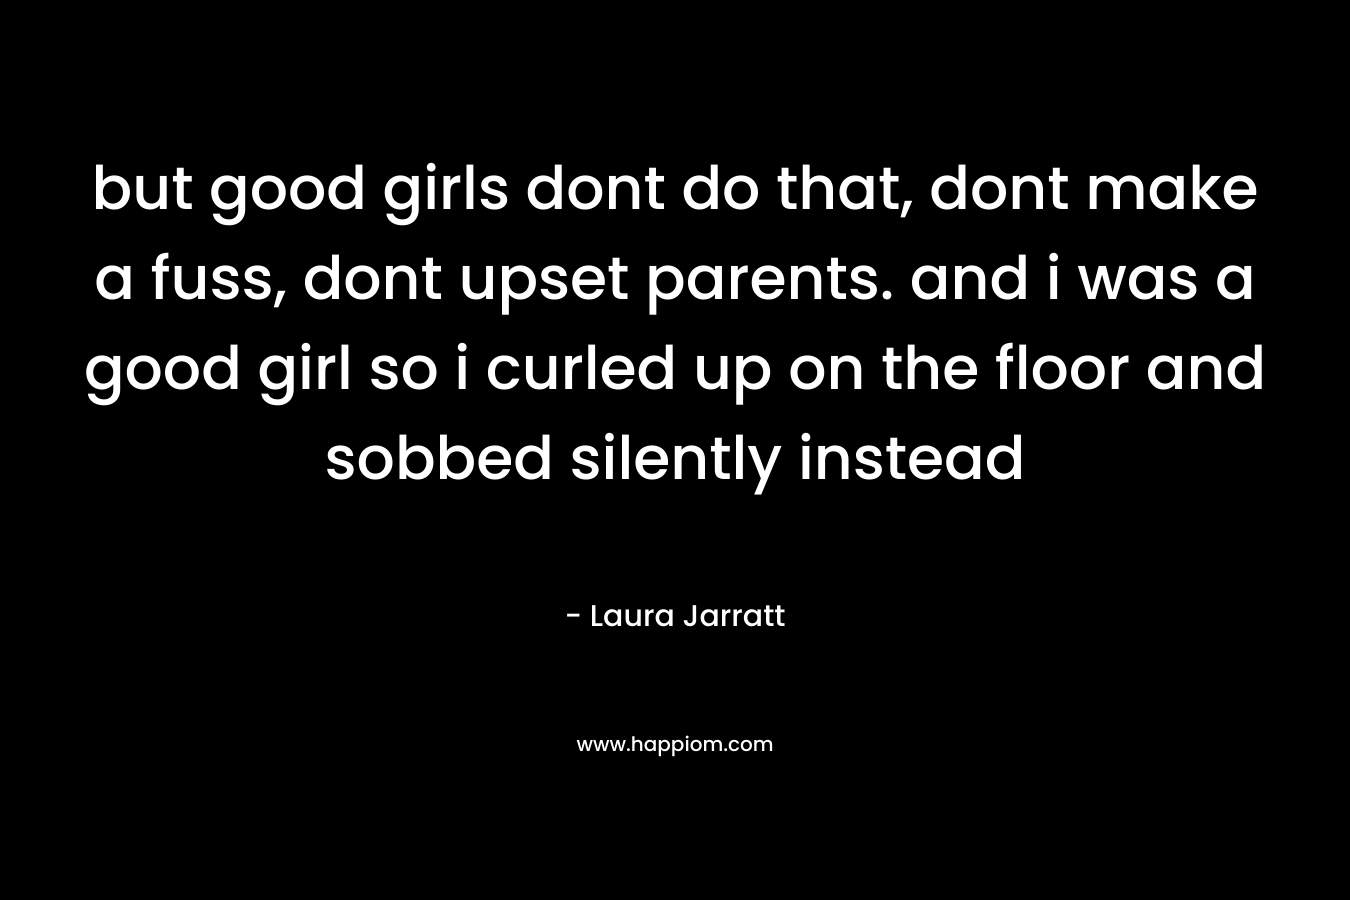 but good girls dont do that, dont make a fuss, dont upset parents. and i was a good girl so i curled up on the floor and sobbed silently instead